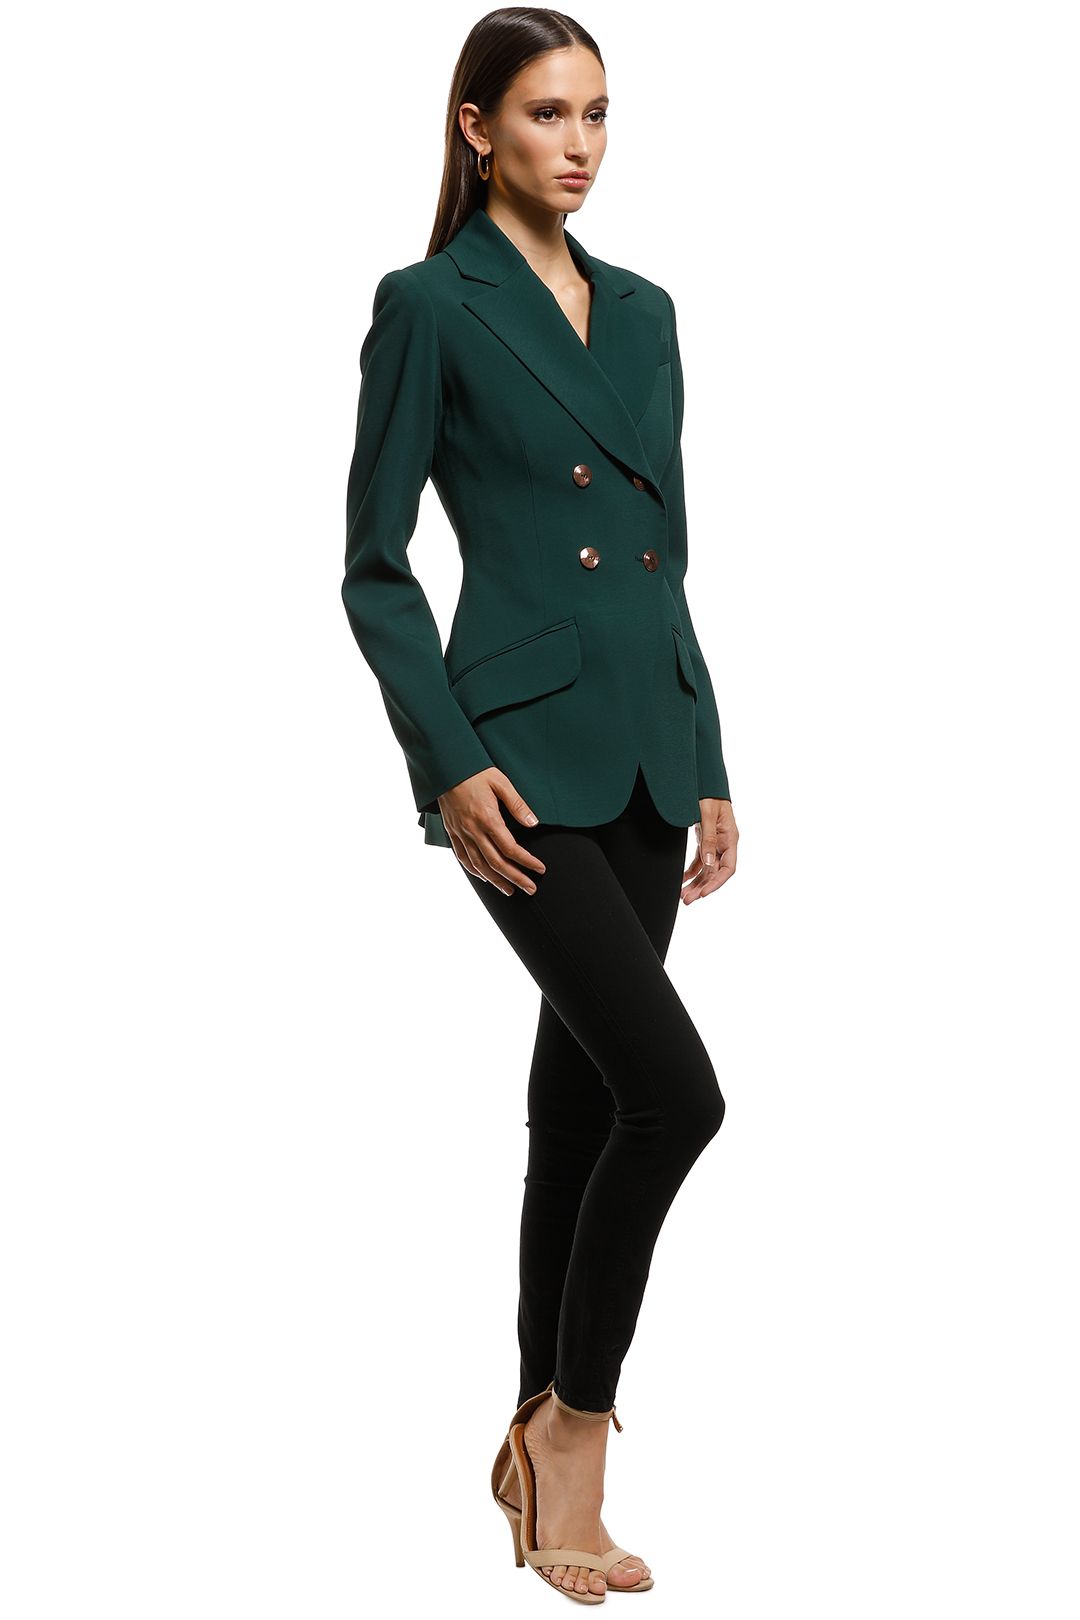 Ginger and Smart - Parity Jacket - Green - Side